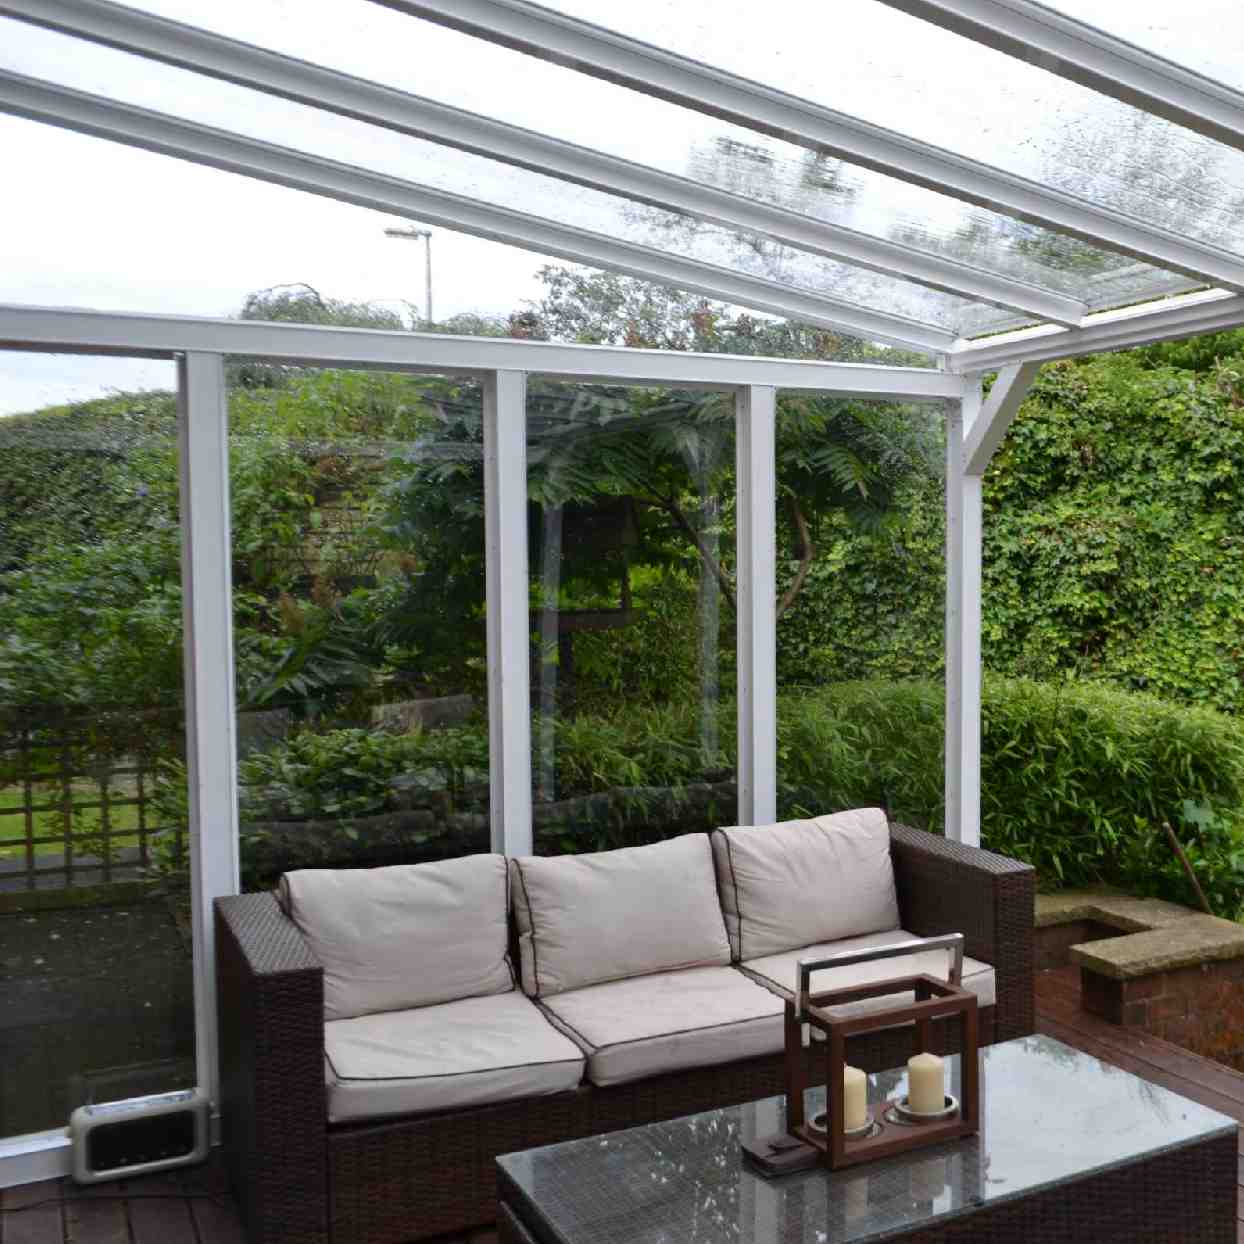 Buy Omega Verandah White with 16mm Polycarbonate Glazing - 8.4m (W) x 4.5m (P), (4) Supporting Posts online today